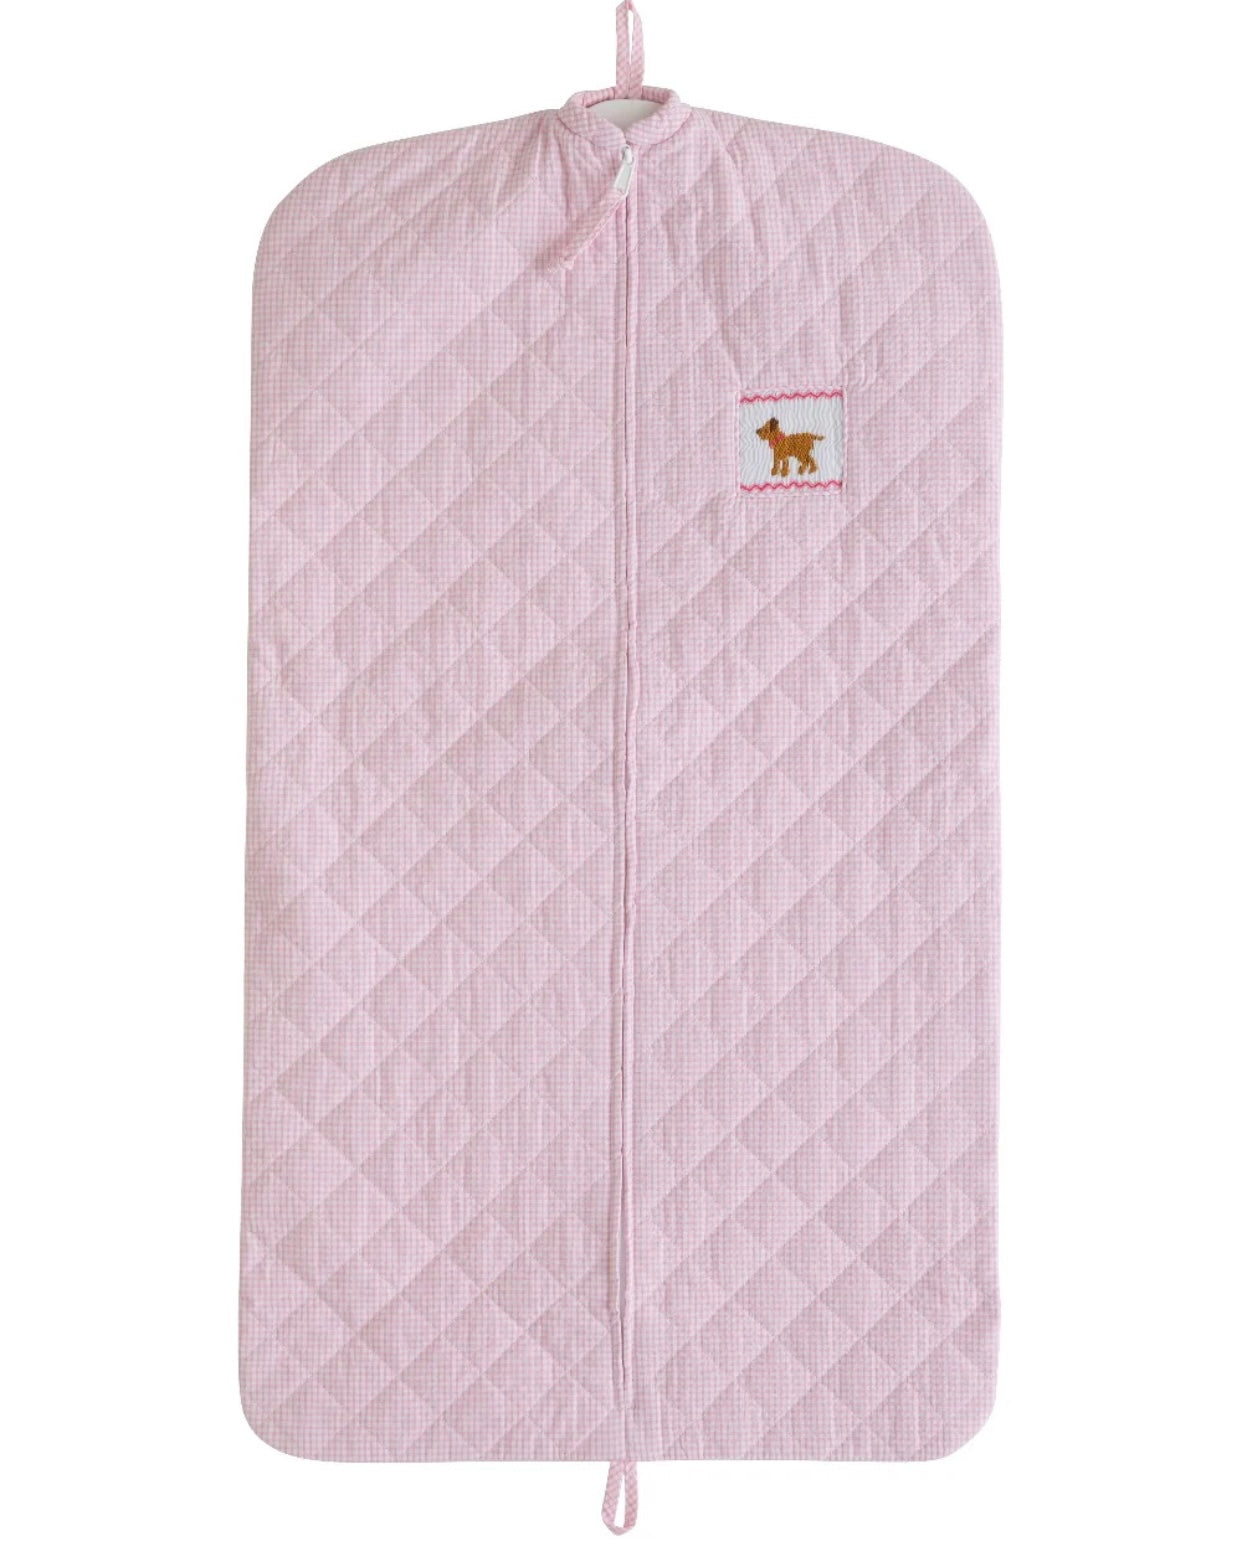 Quilted Luggage Garment - Girl Lab